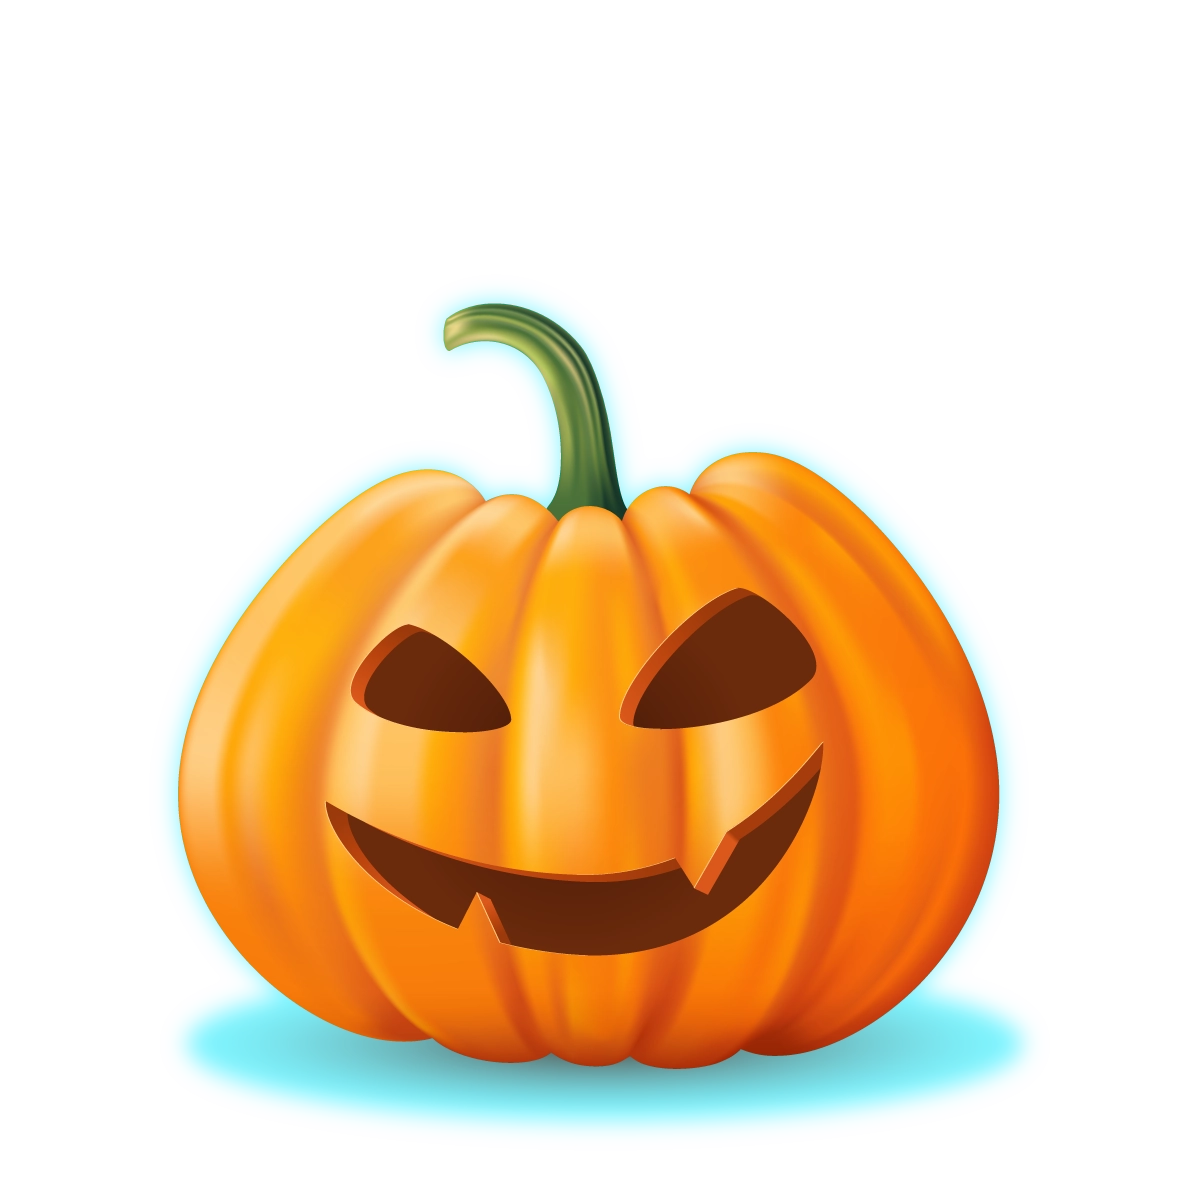 pumpkin hover and selected state image